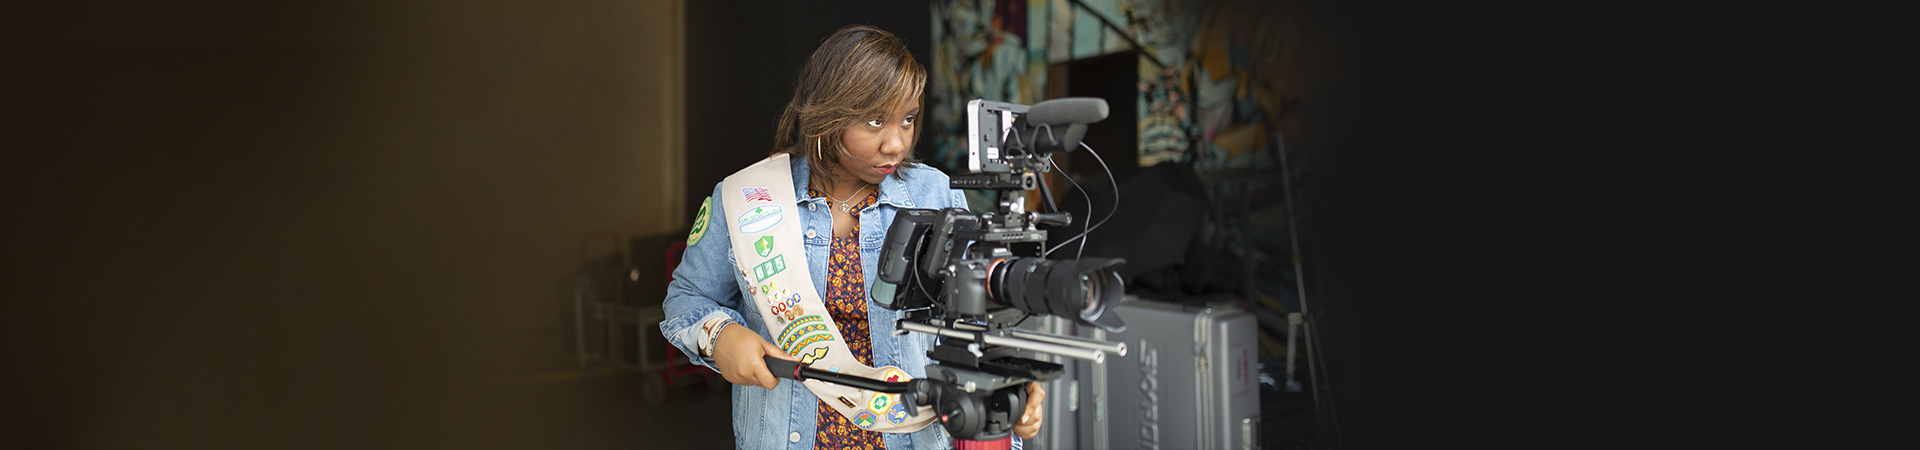  A Girl Scout operating a professional film camera 